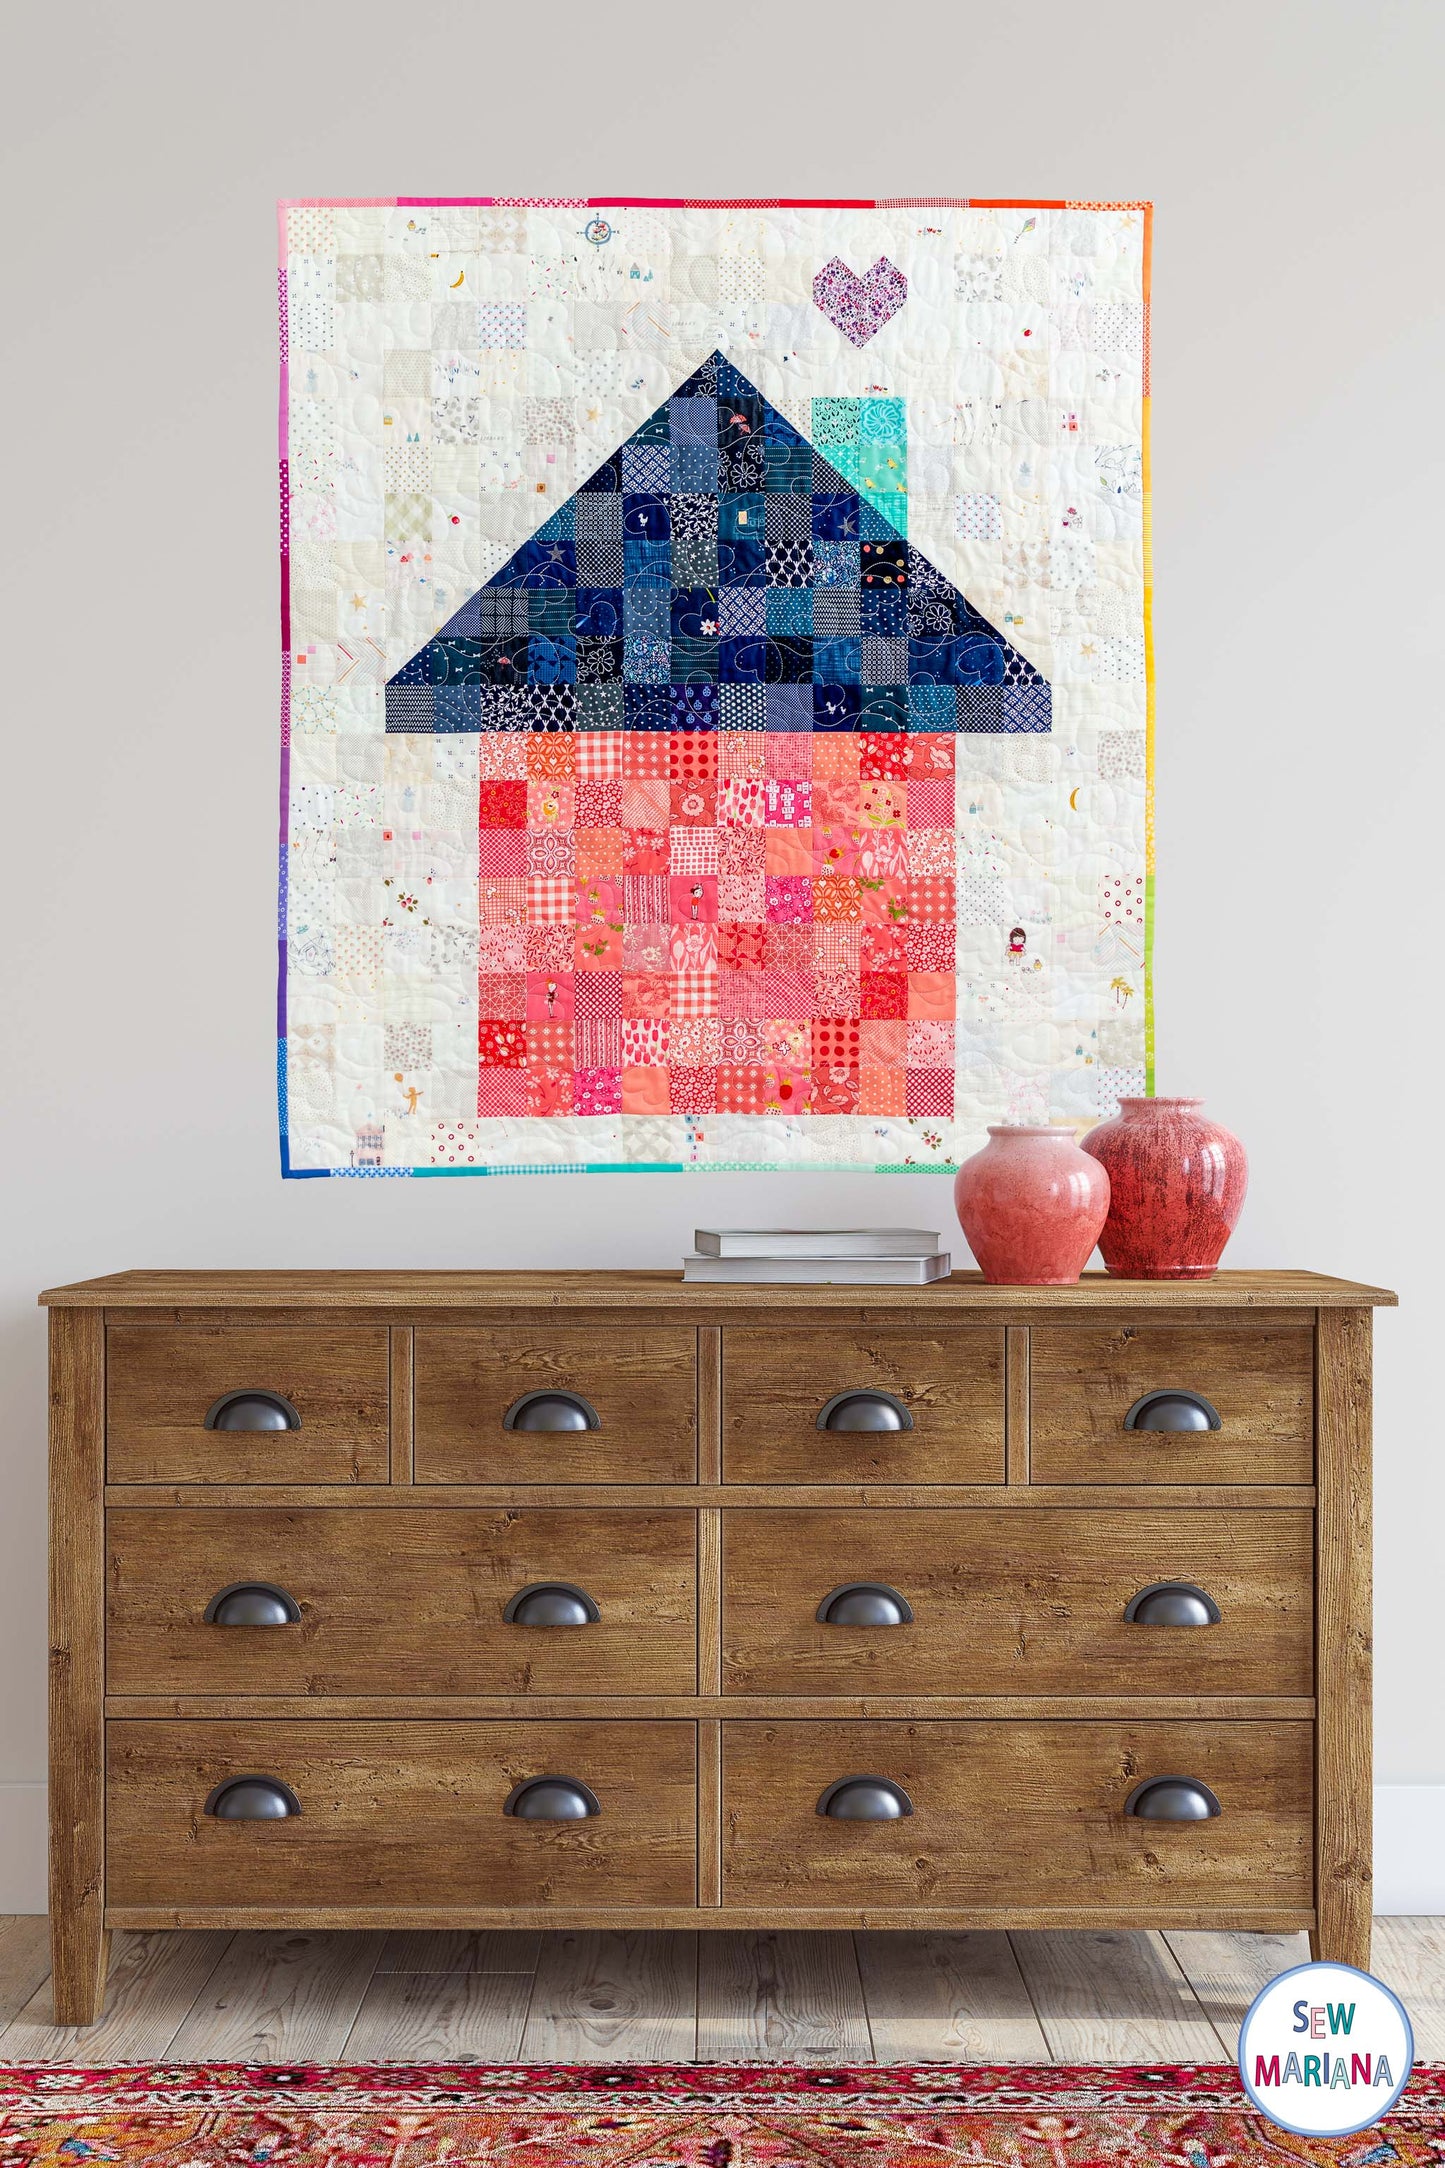 photo of the full house quilt baby size hanguing on the wall above a console table